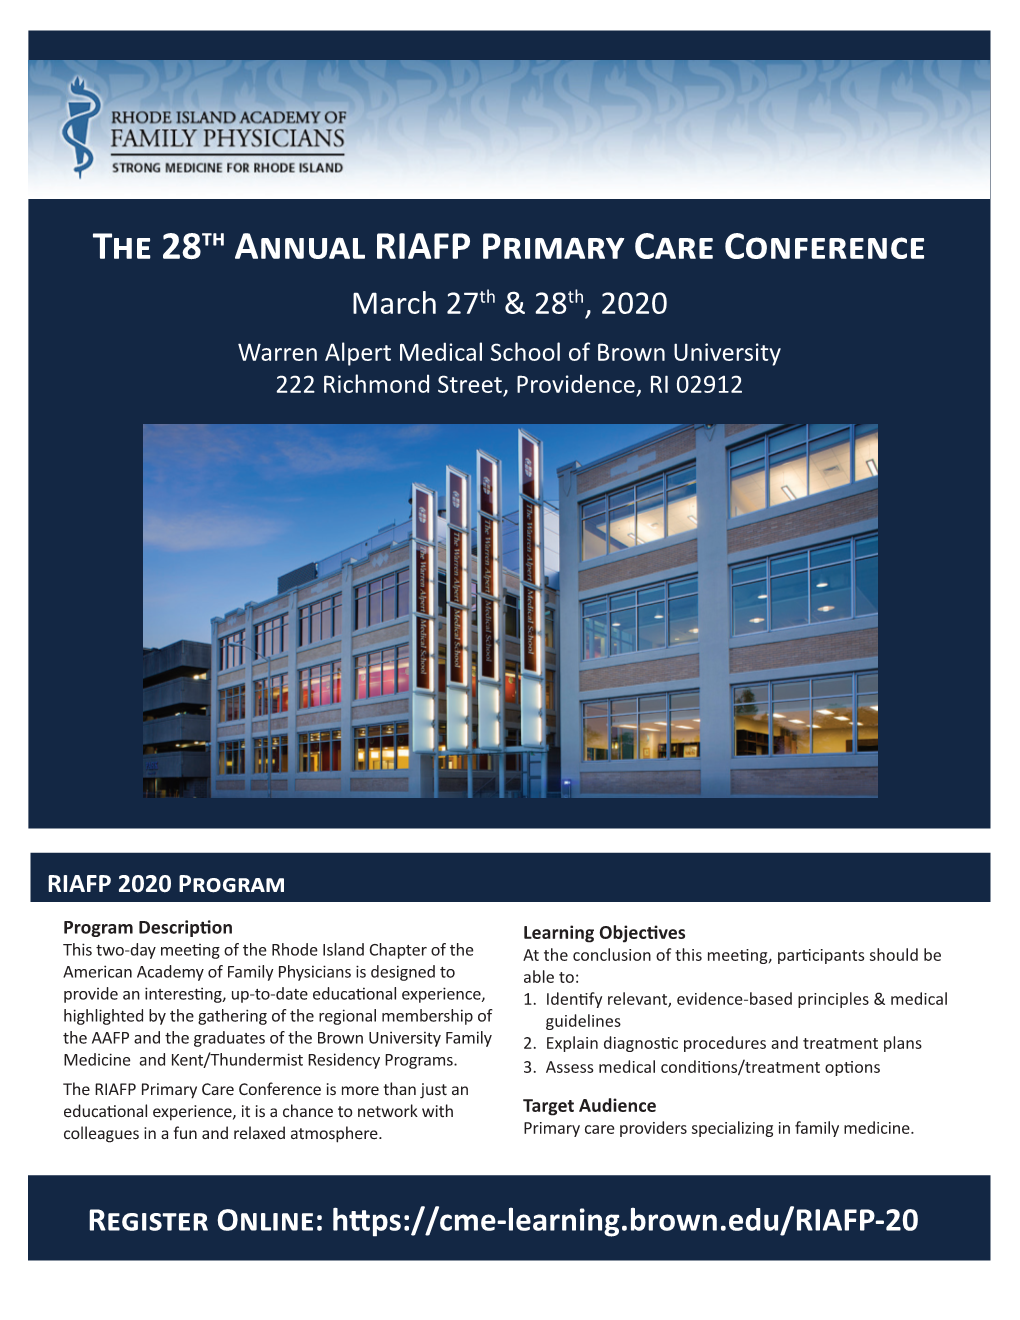 The 28Th Annual RIAFP Primary Care Conference March 27Th & 28Th, 2020 Warren Alpert Medical School of Brown University 222 Richmond Street, Providence, RI 02912